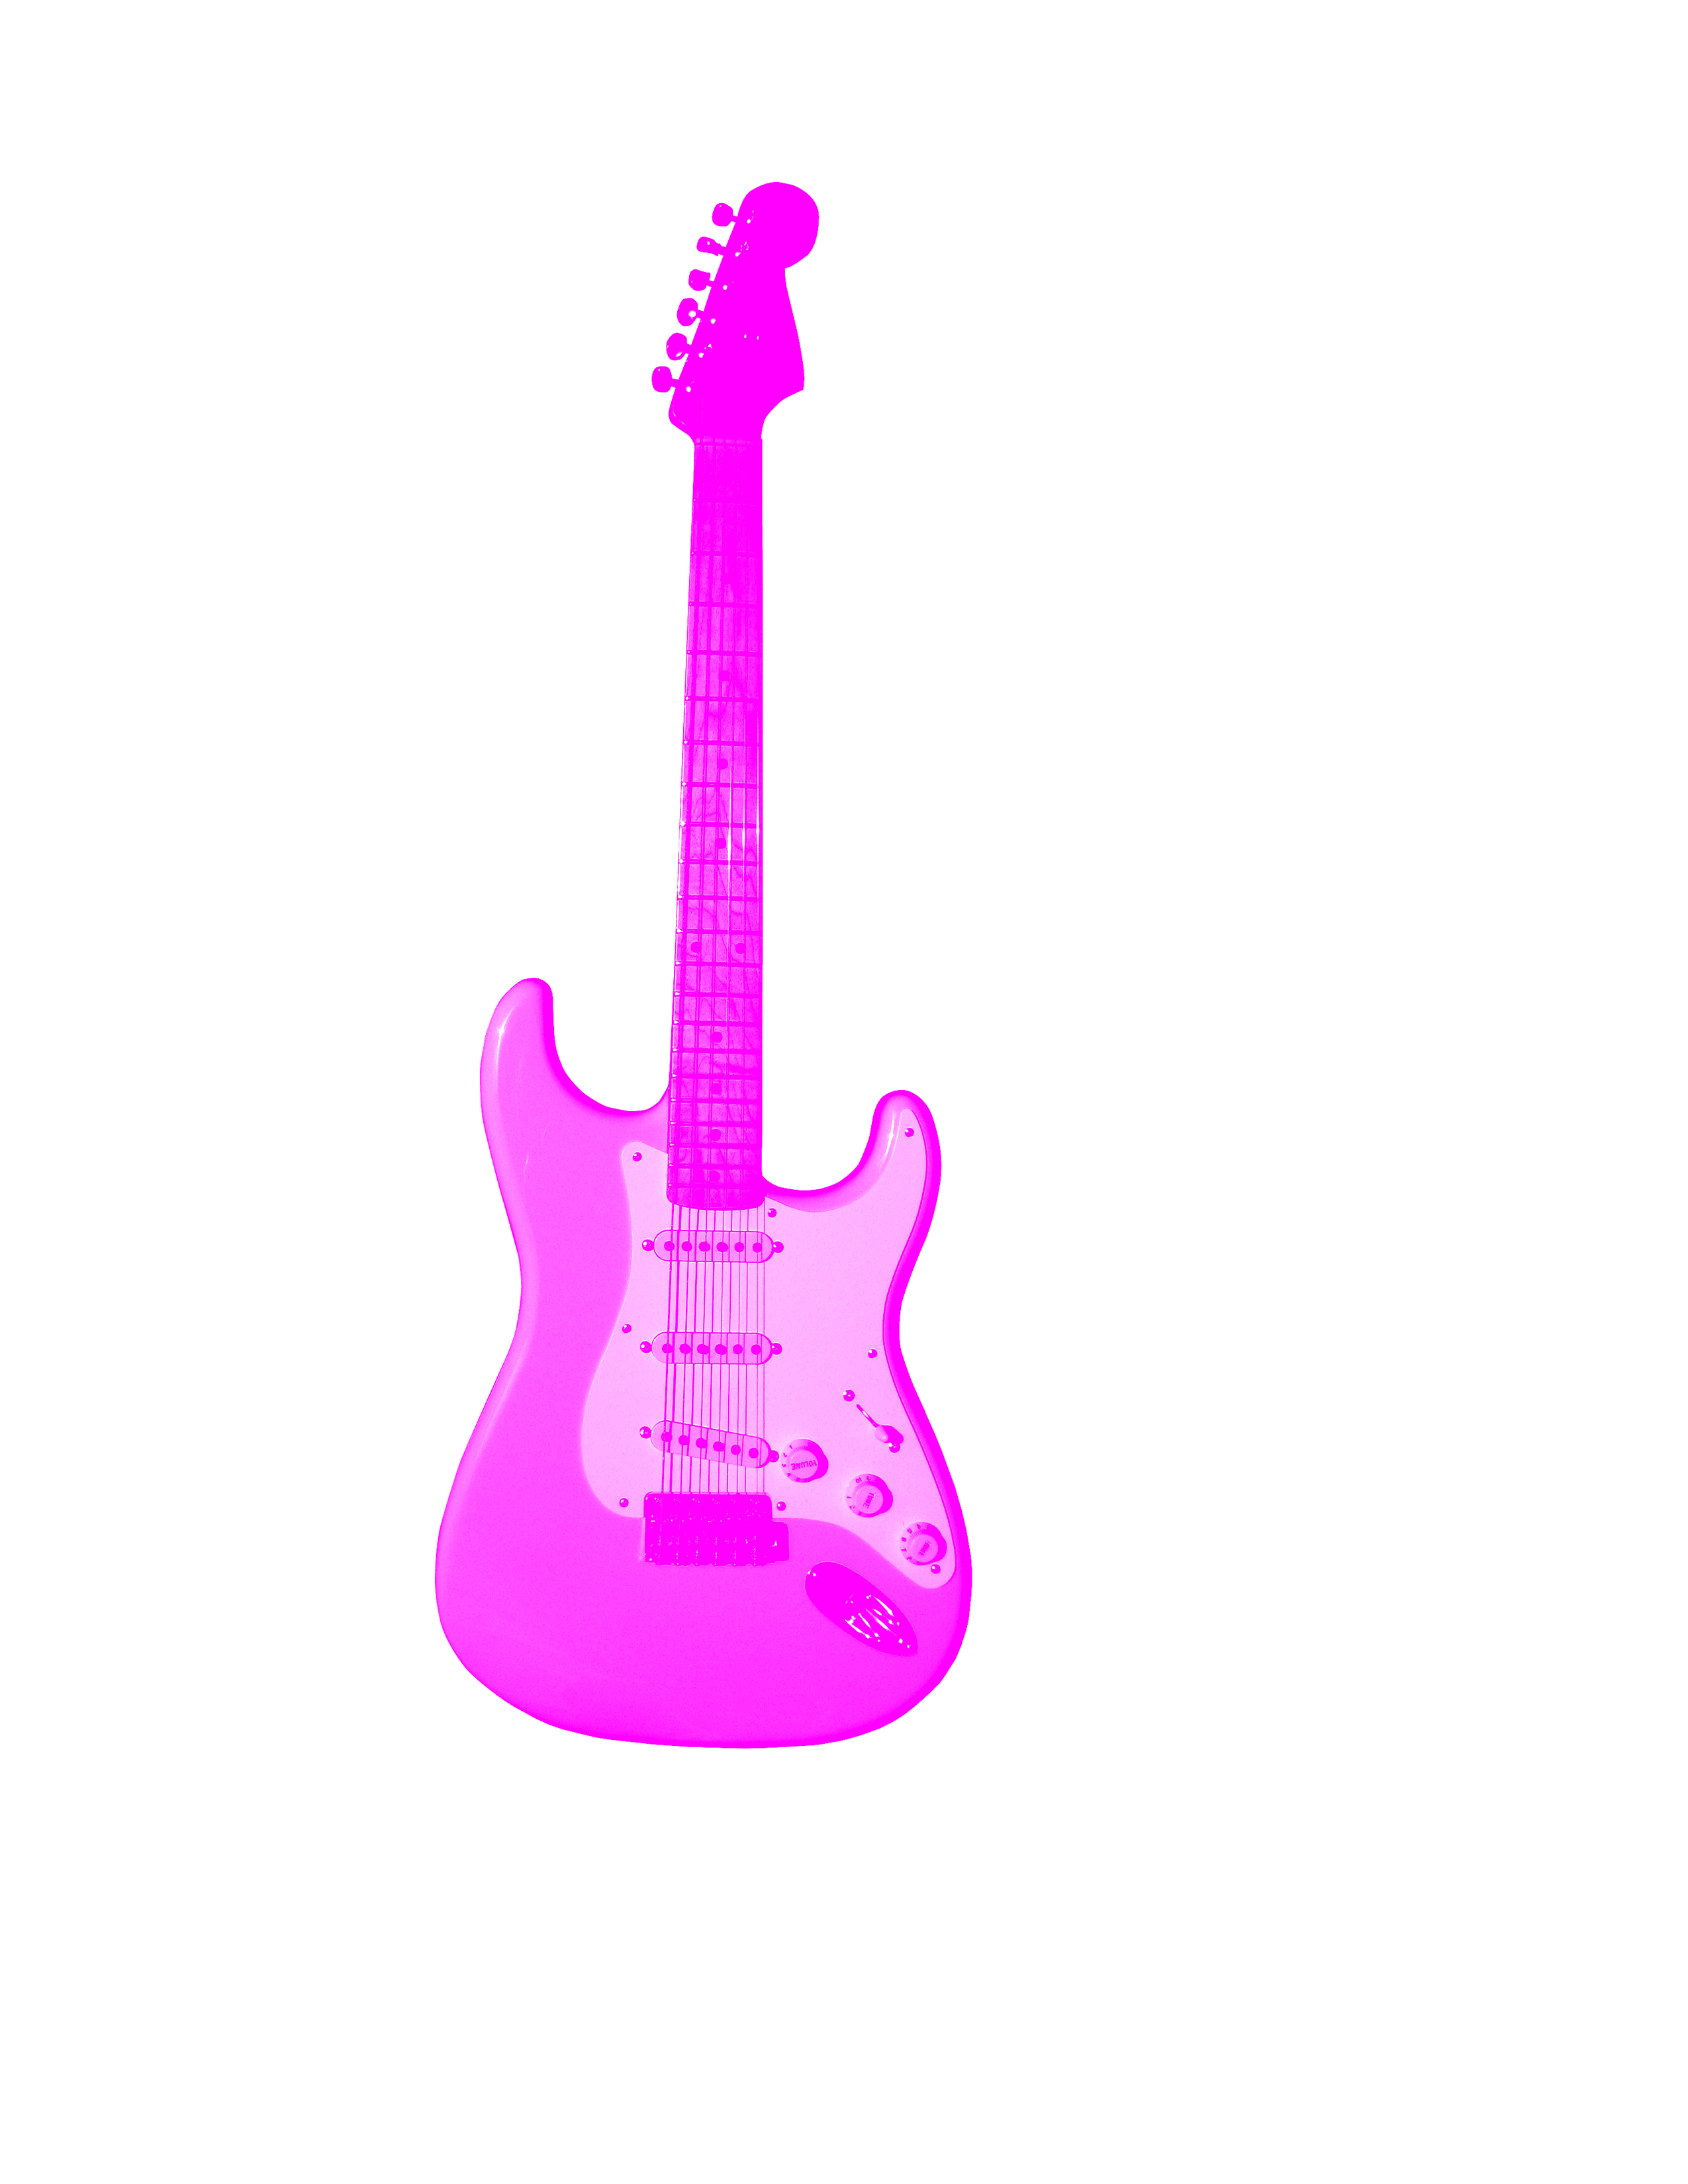 Rock And Roll Guitar Clip Art | Clipart Panda - Free Clipart Images